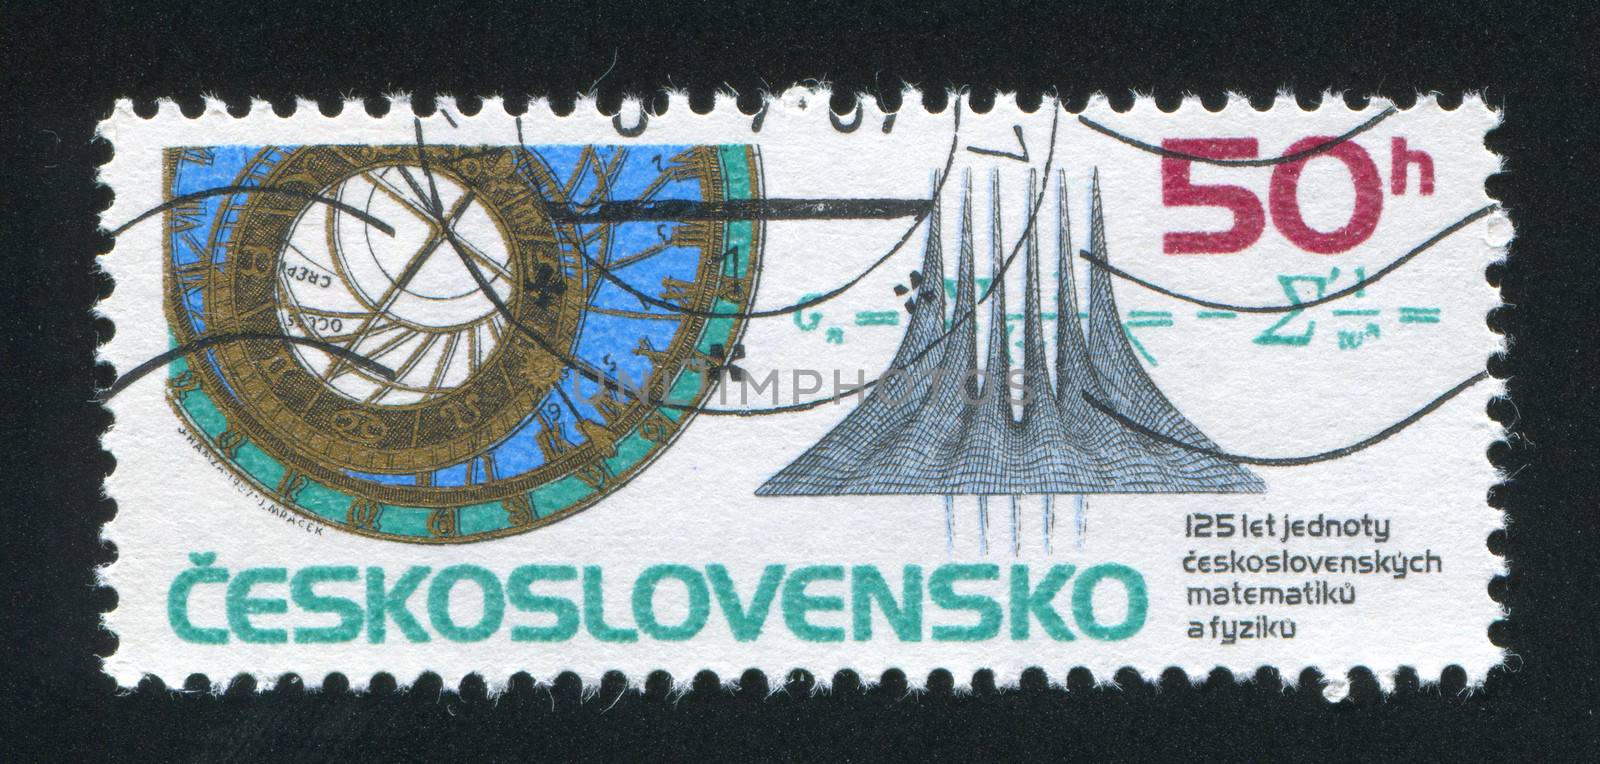 CZECHOSLOVAKIA - CIRCA 1987: stamp printed by Czechoslovakia, shows Prague town hall mathematical clock and theory of functions diagram, circa 1987